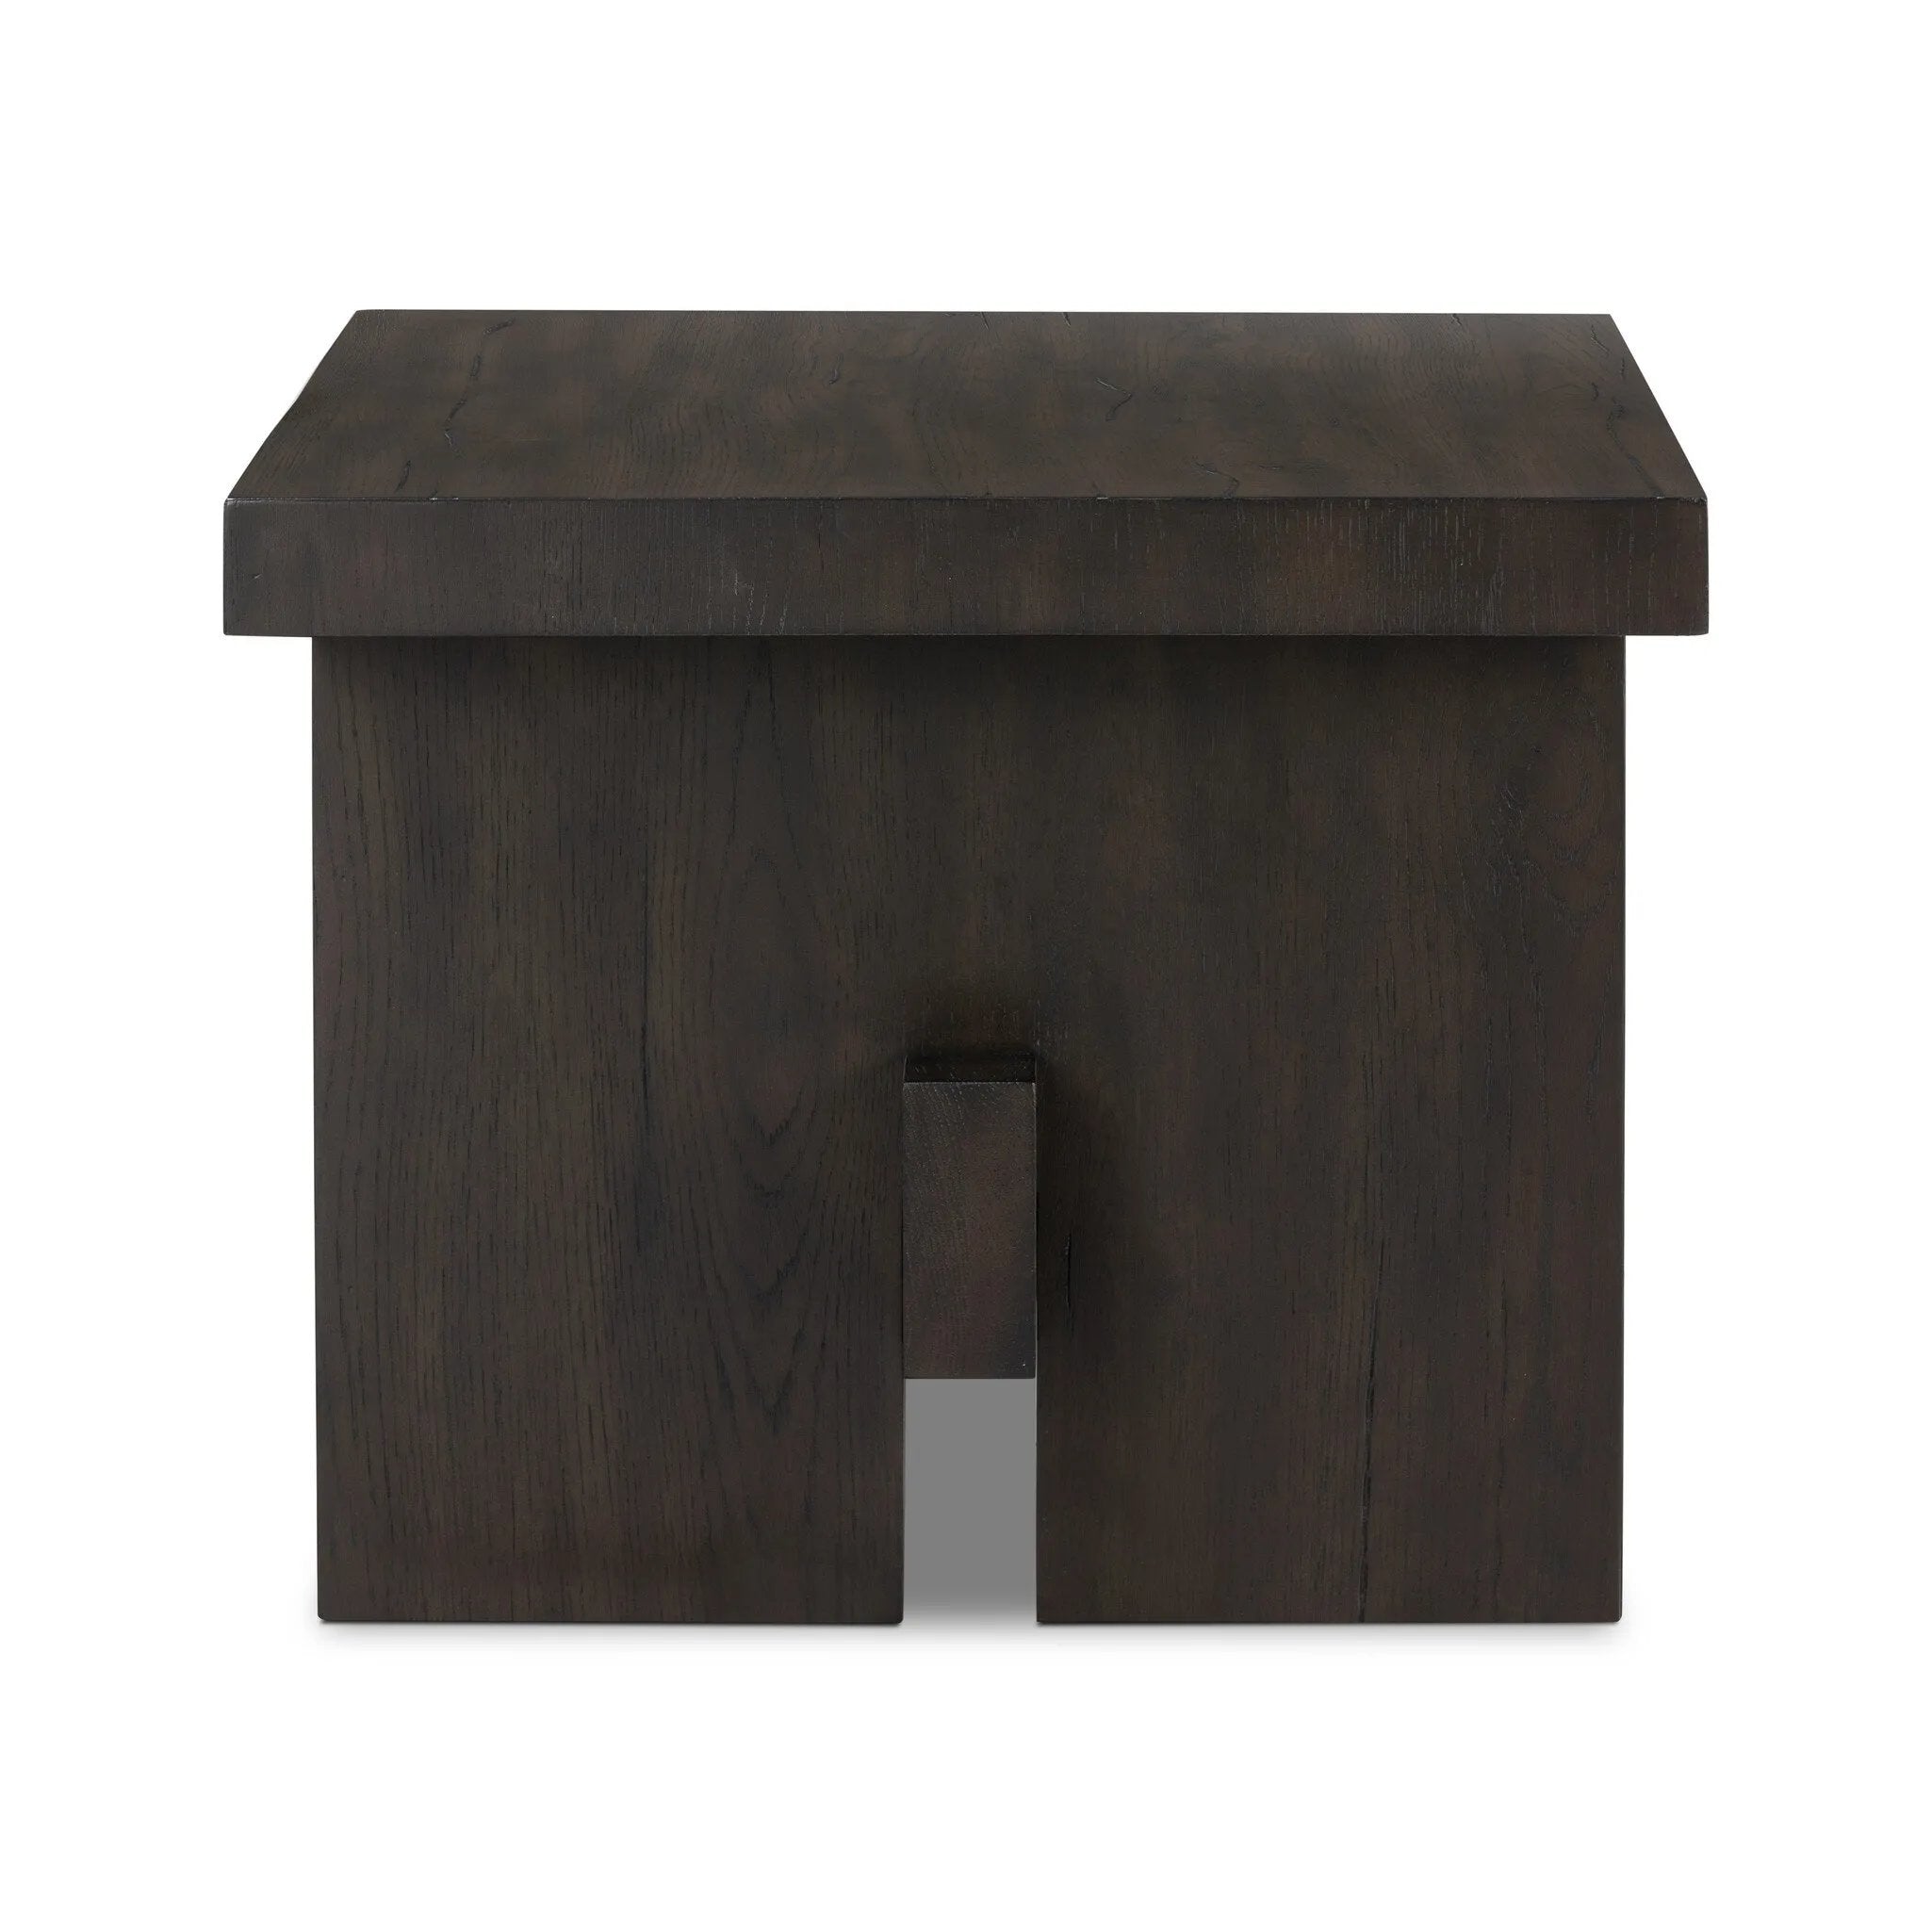 A versatile end table of smoked black oak features joint and connection construction for a design-forward look. Visible knots and graining add character.Collection: Haide Amethyst Home provides interior design, new home construction design consulting, vintage area rugs, and lighting in the Charlotte metro area.